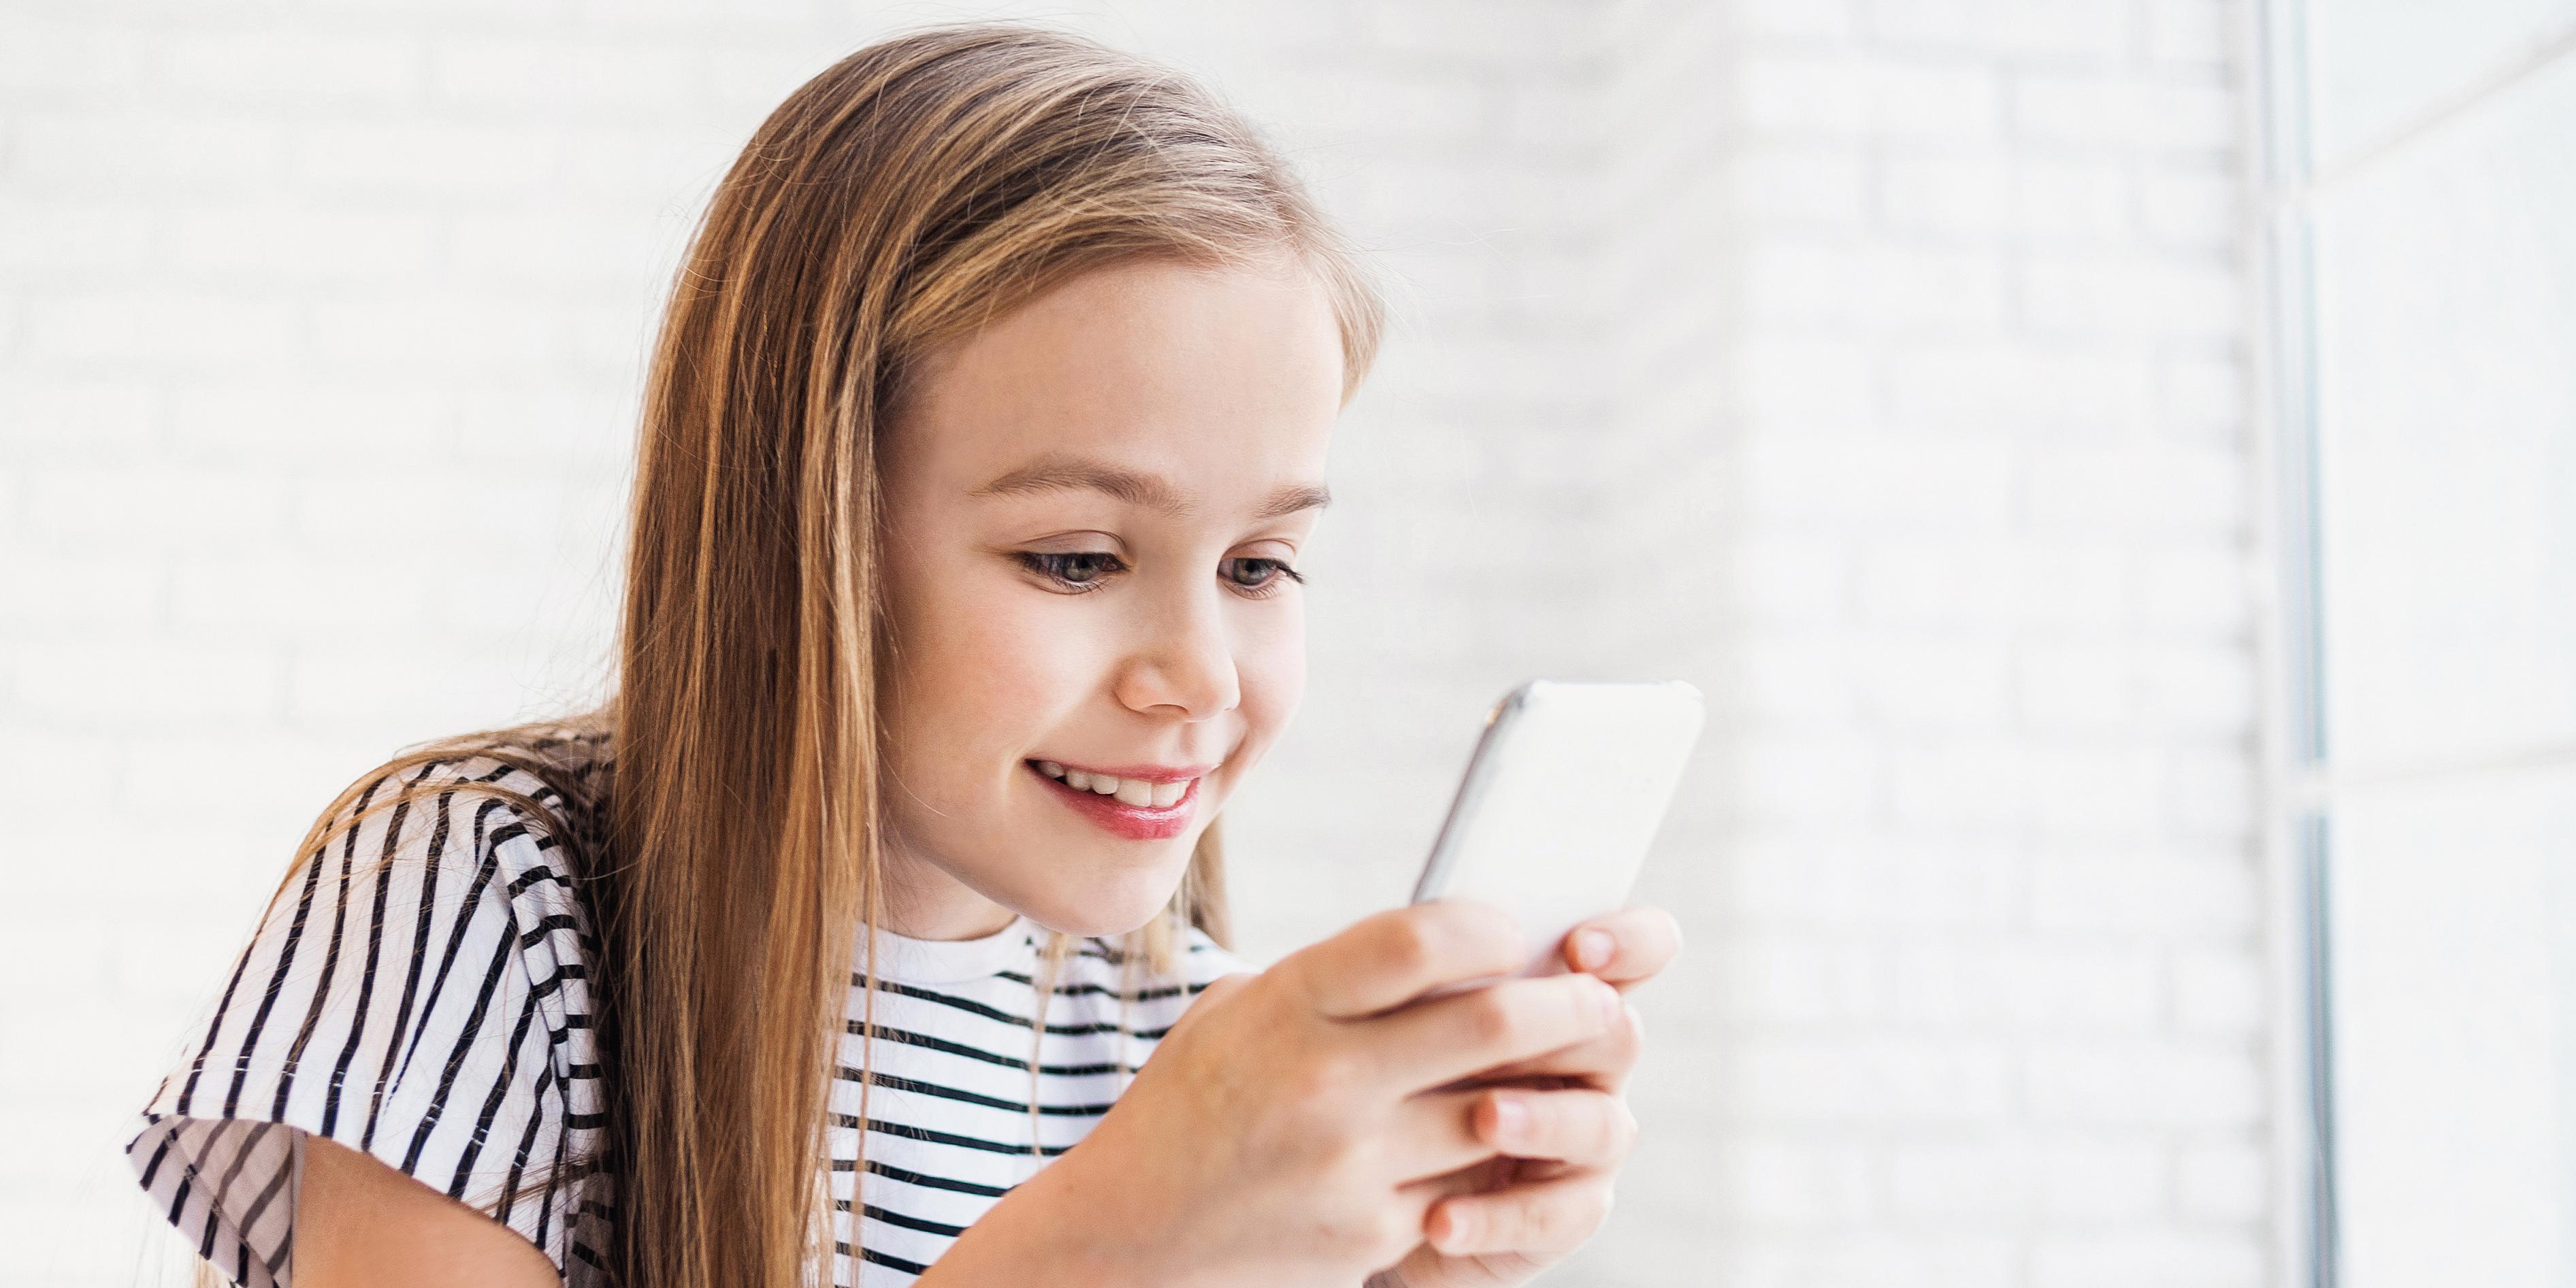 How to buy your kid their first mobile phone